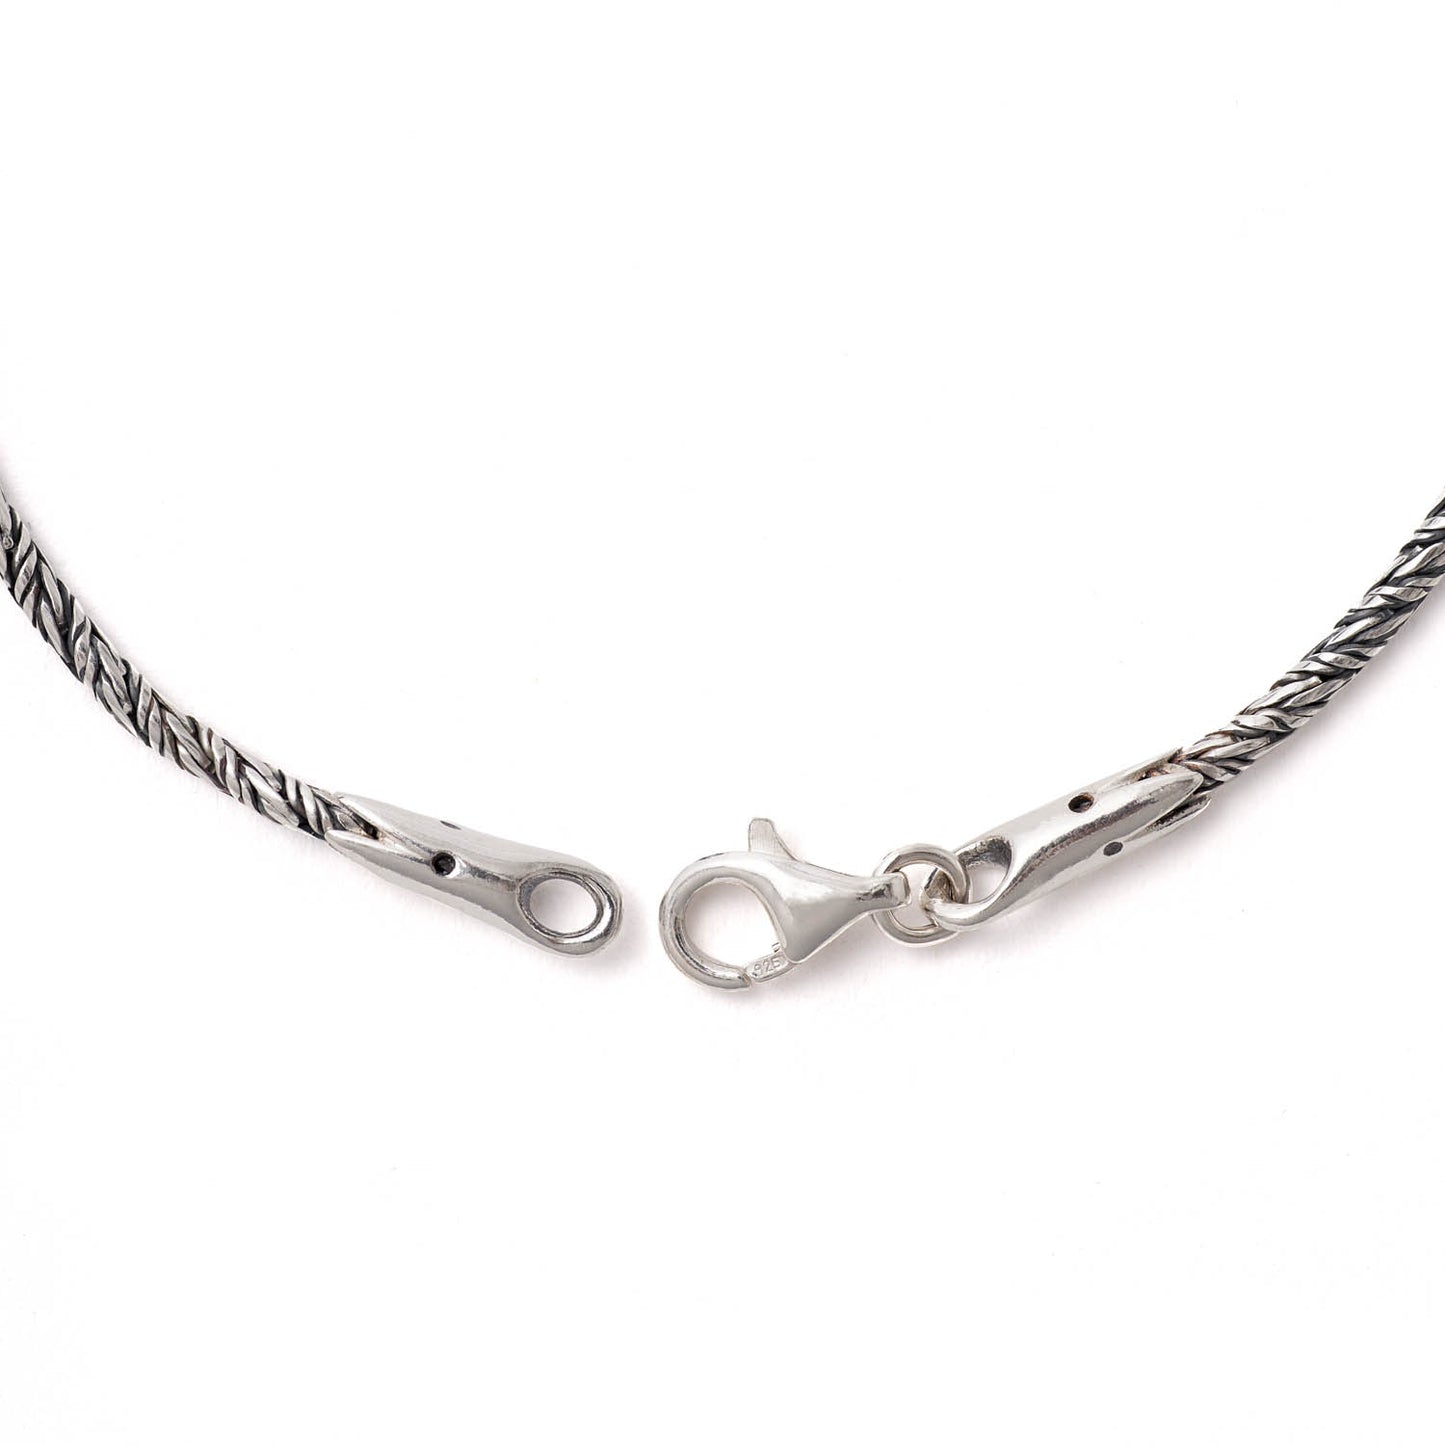 Konstantino LEATHER CORD Mens Necklace with Sterling Silver Clasp